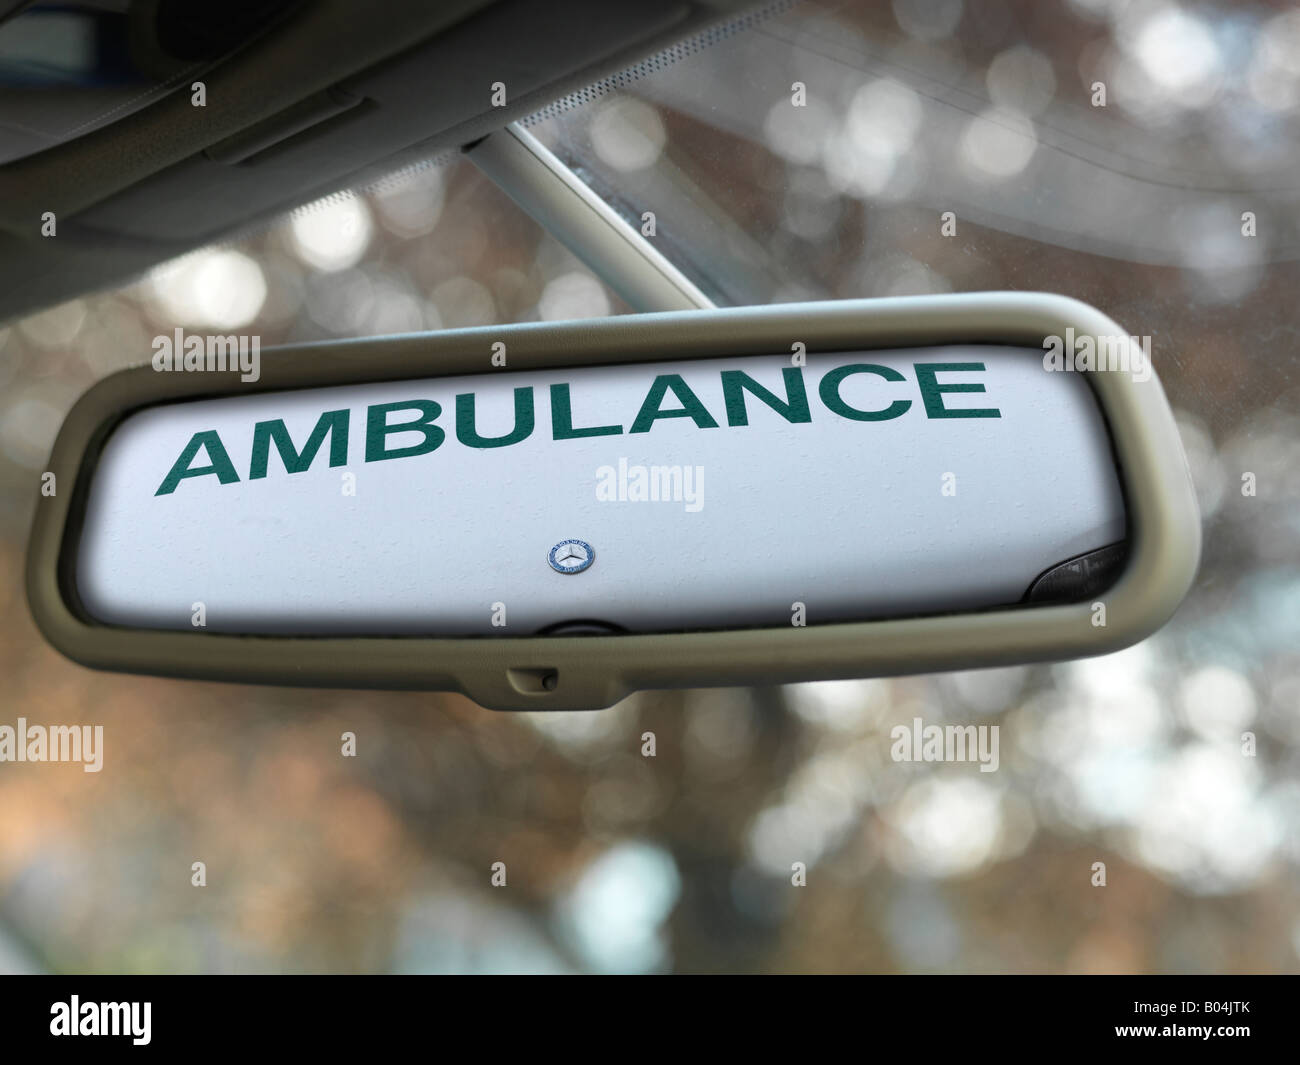 Reflection Of The Word Ambulance In Car Rear View Mirror Stock Photo